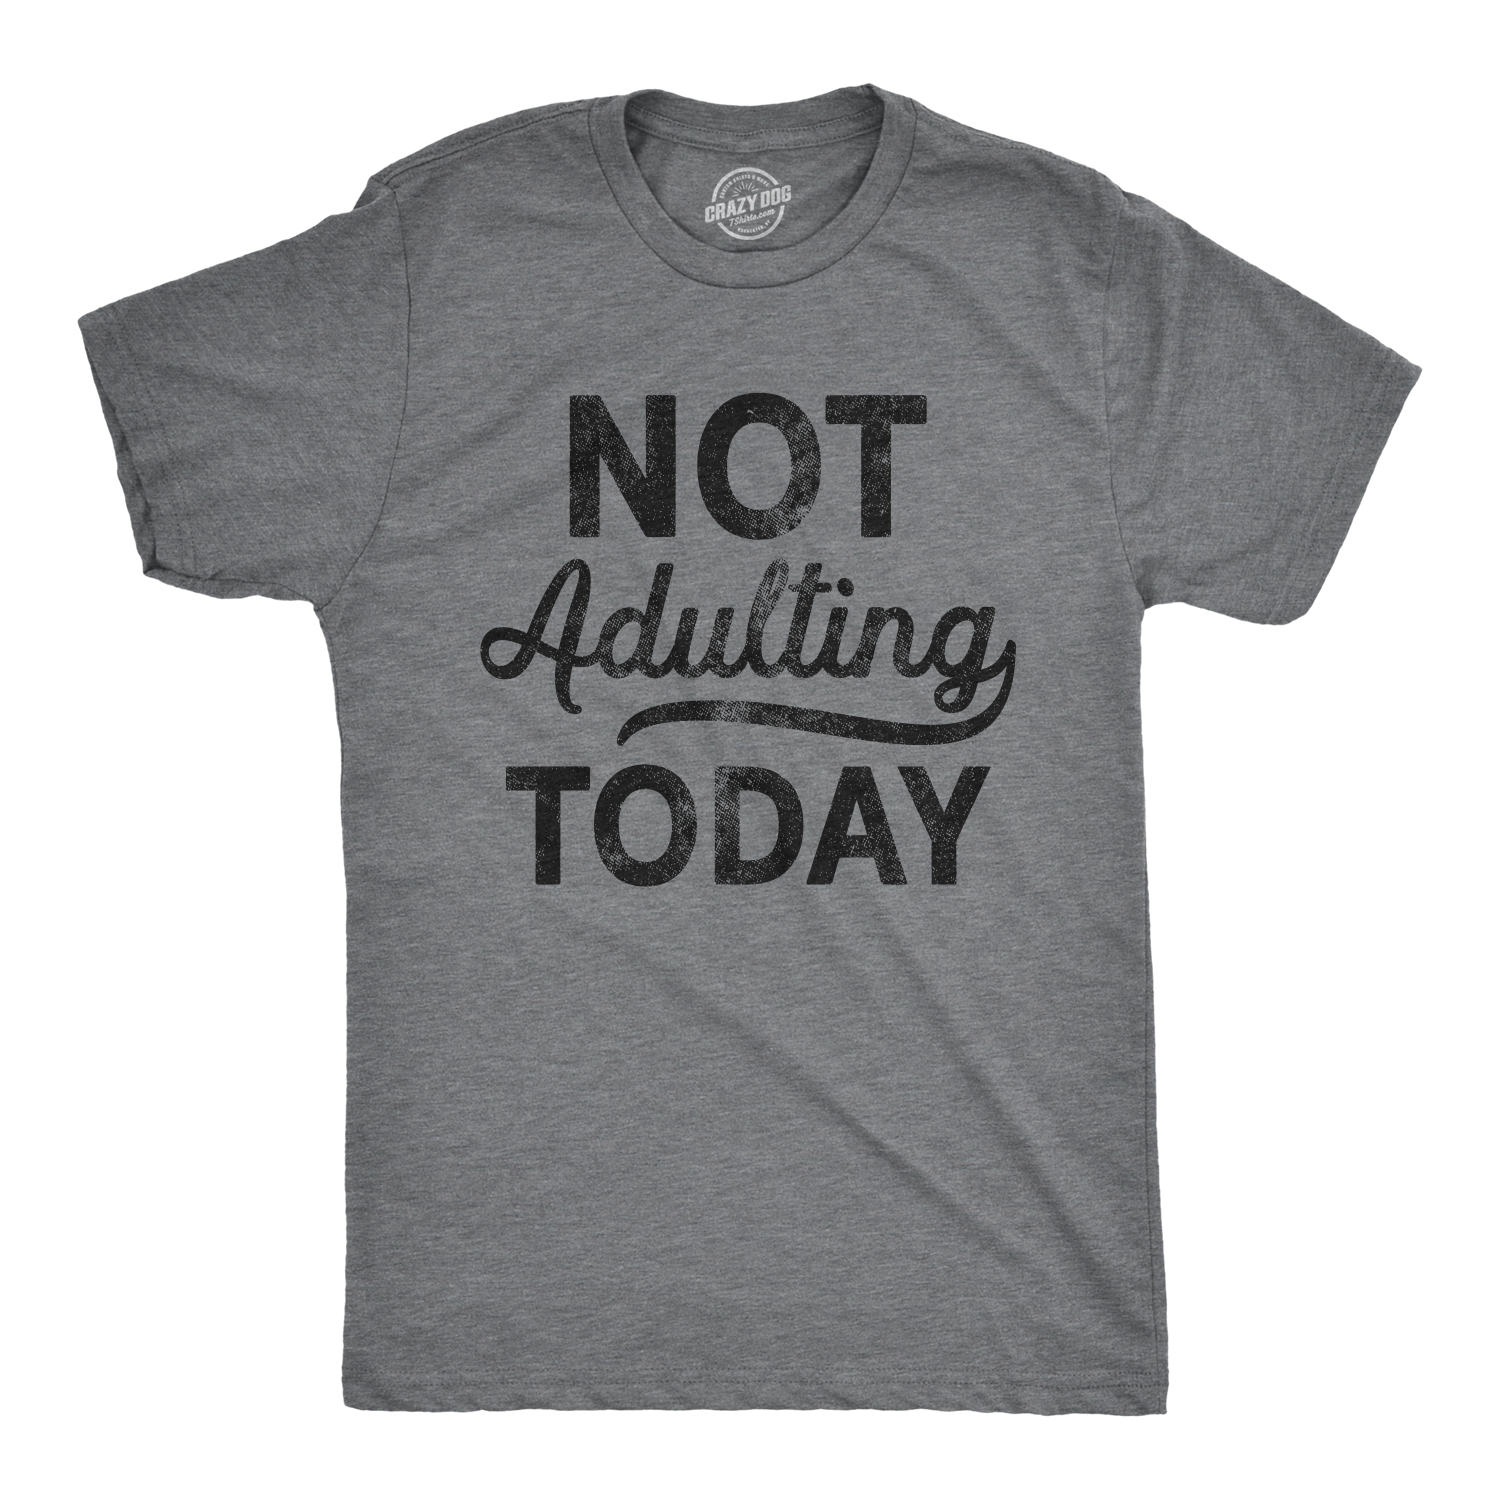 Crazy Dog T-Shirts - Mens Not Adulting Today T shirt Hilarious Graphic ...